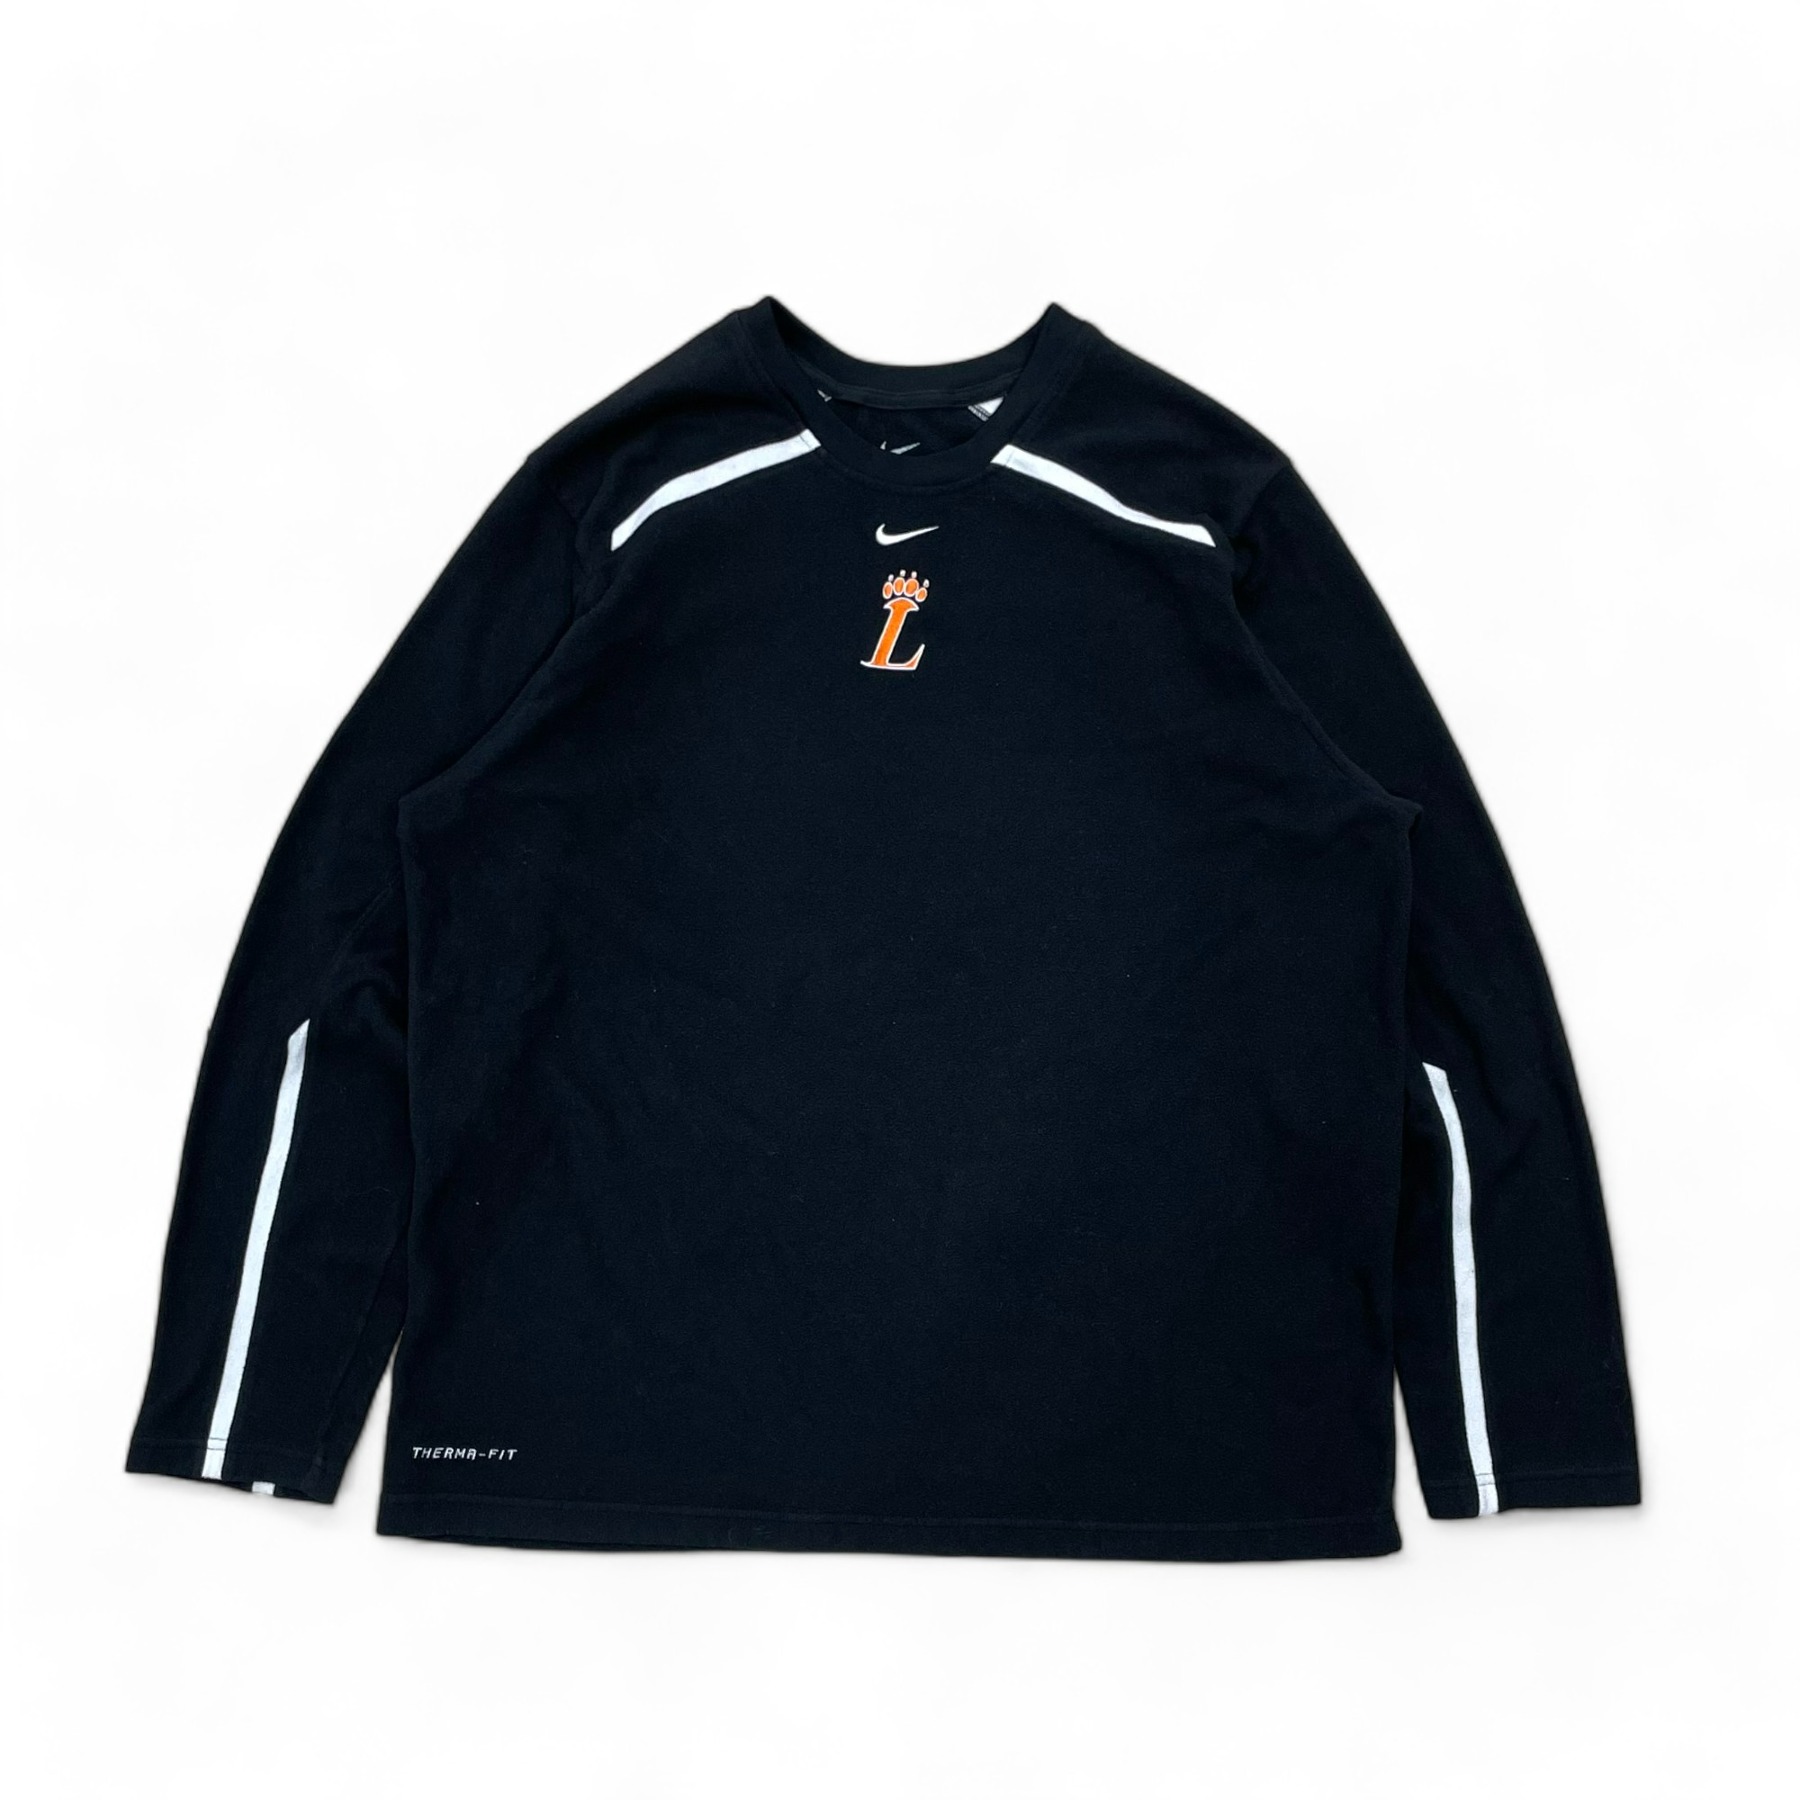 2011 NIKE Therma Fit Pullover Fleece - L